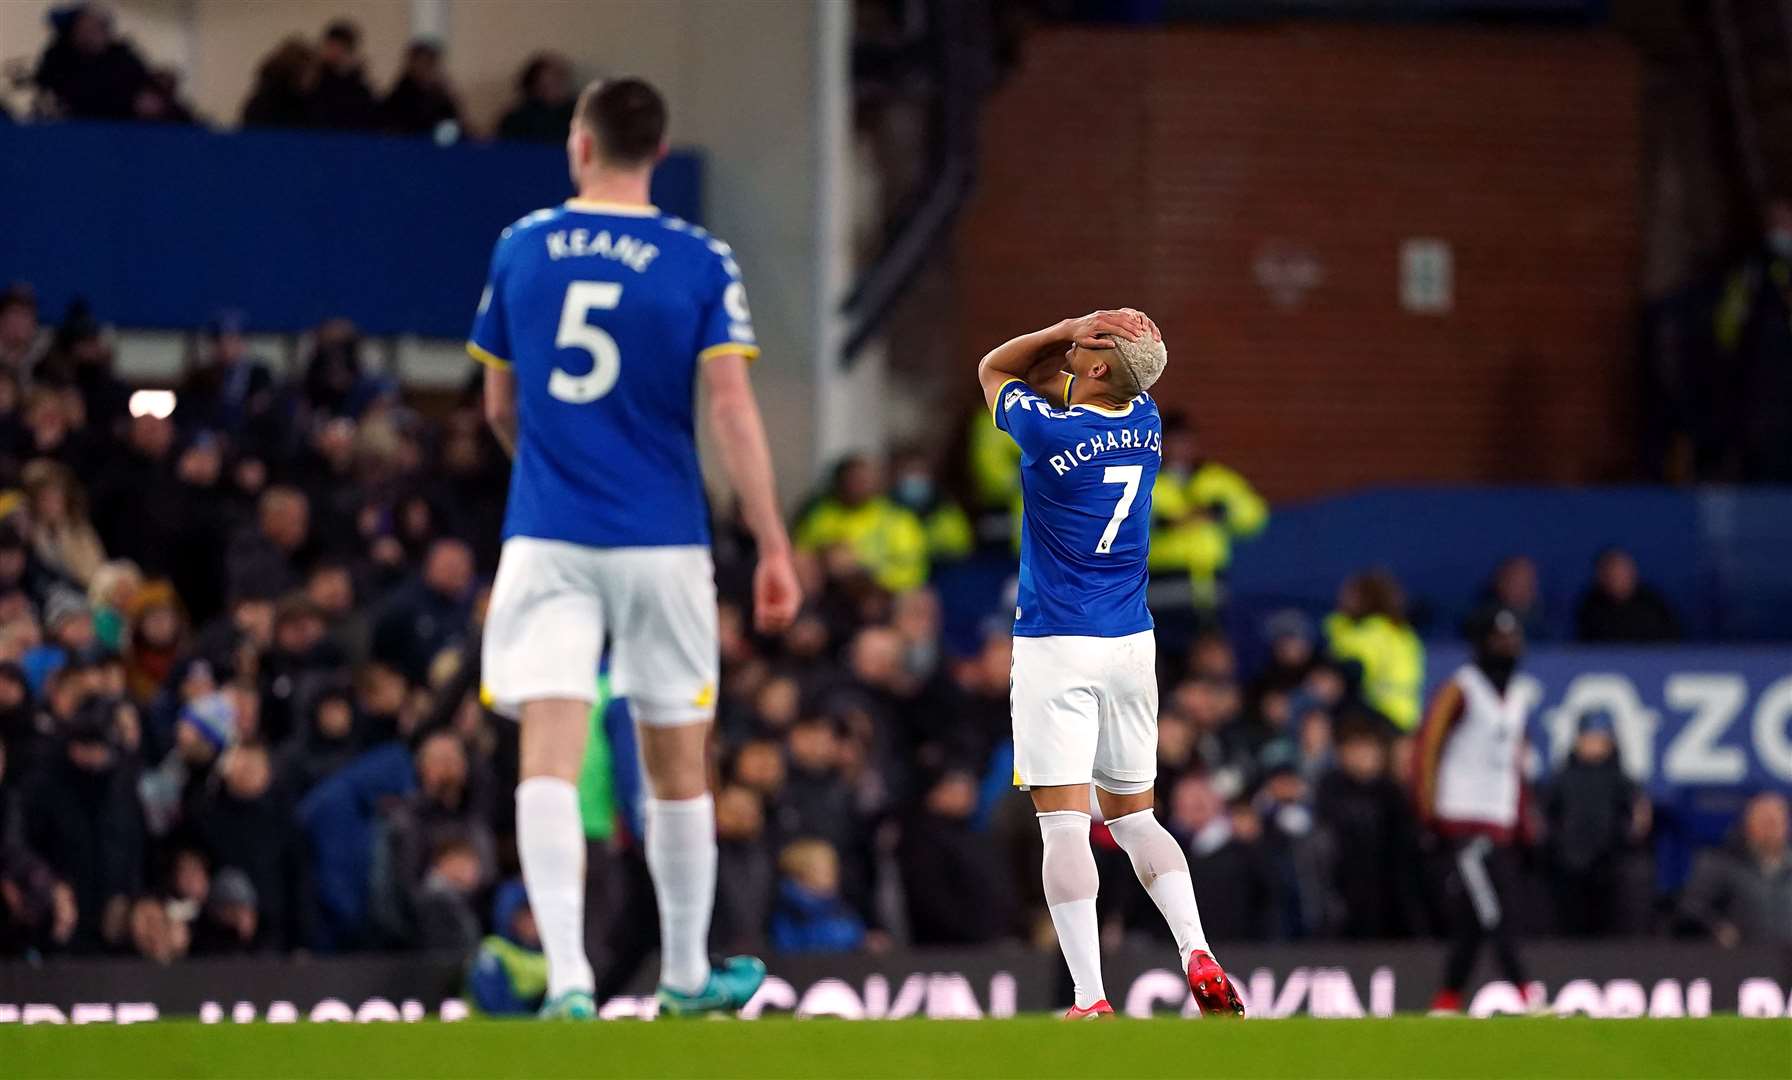 Everton’s Richarlison reacts after having a second goal against Arsenal ruled out by VAR at Goodison Park last season (Martin Rickett/PA)